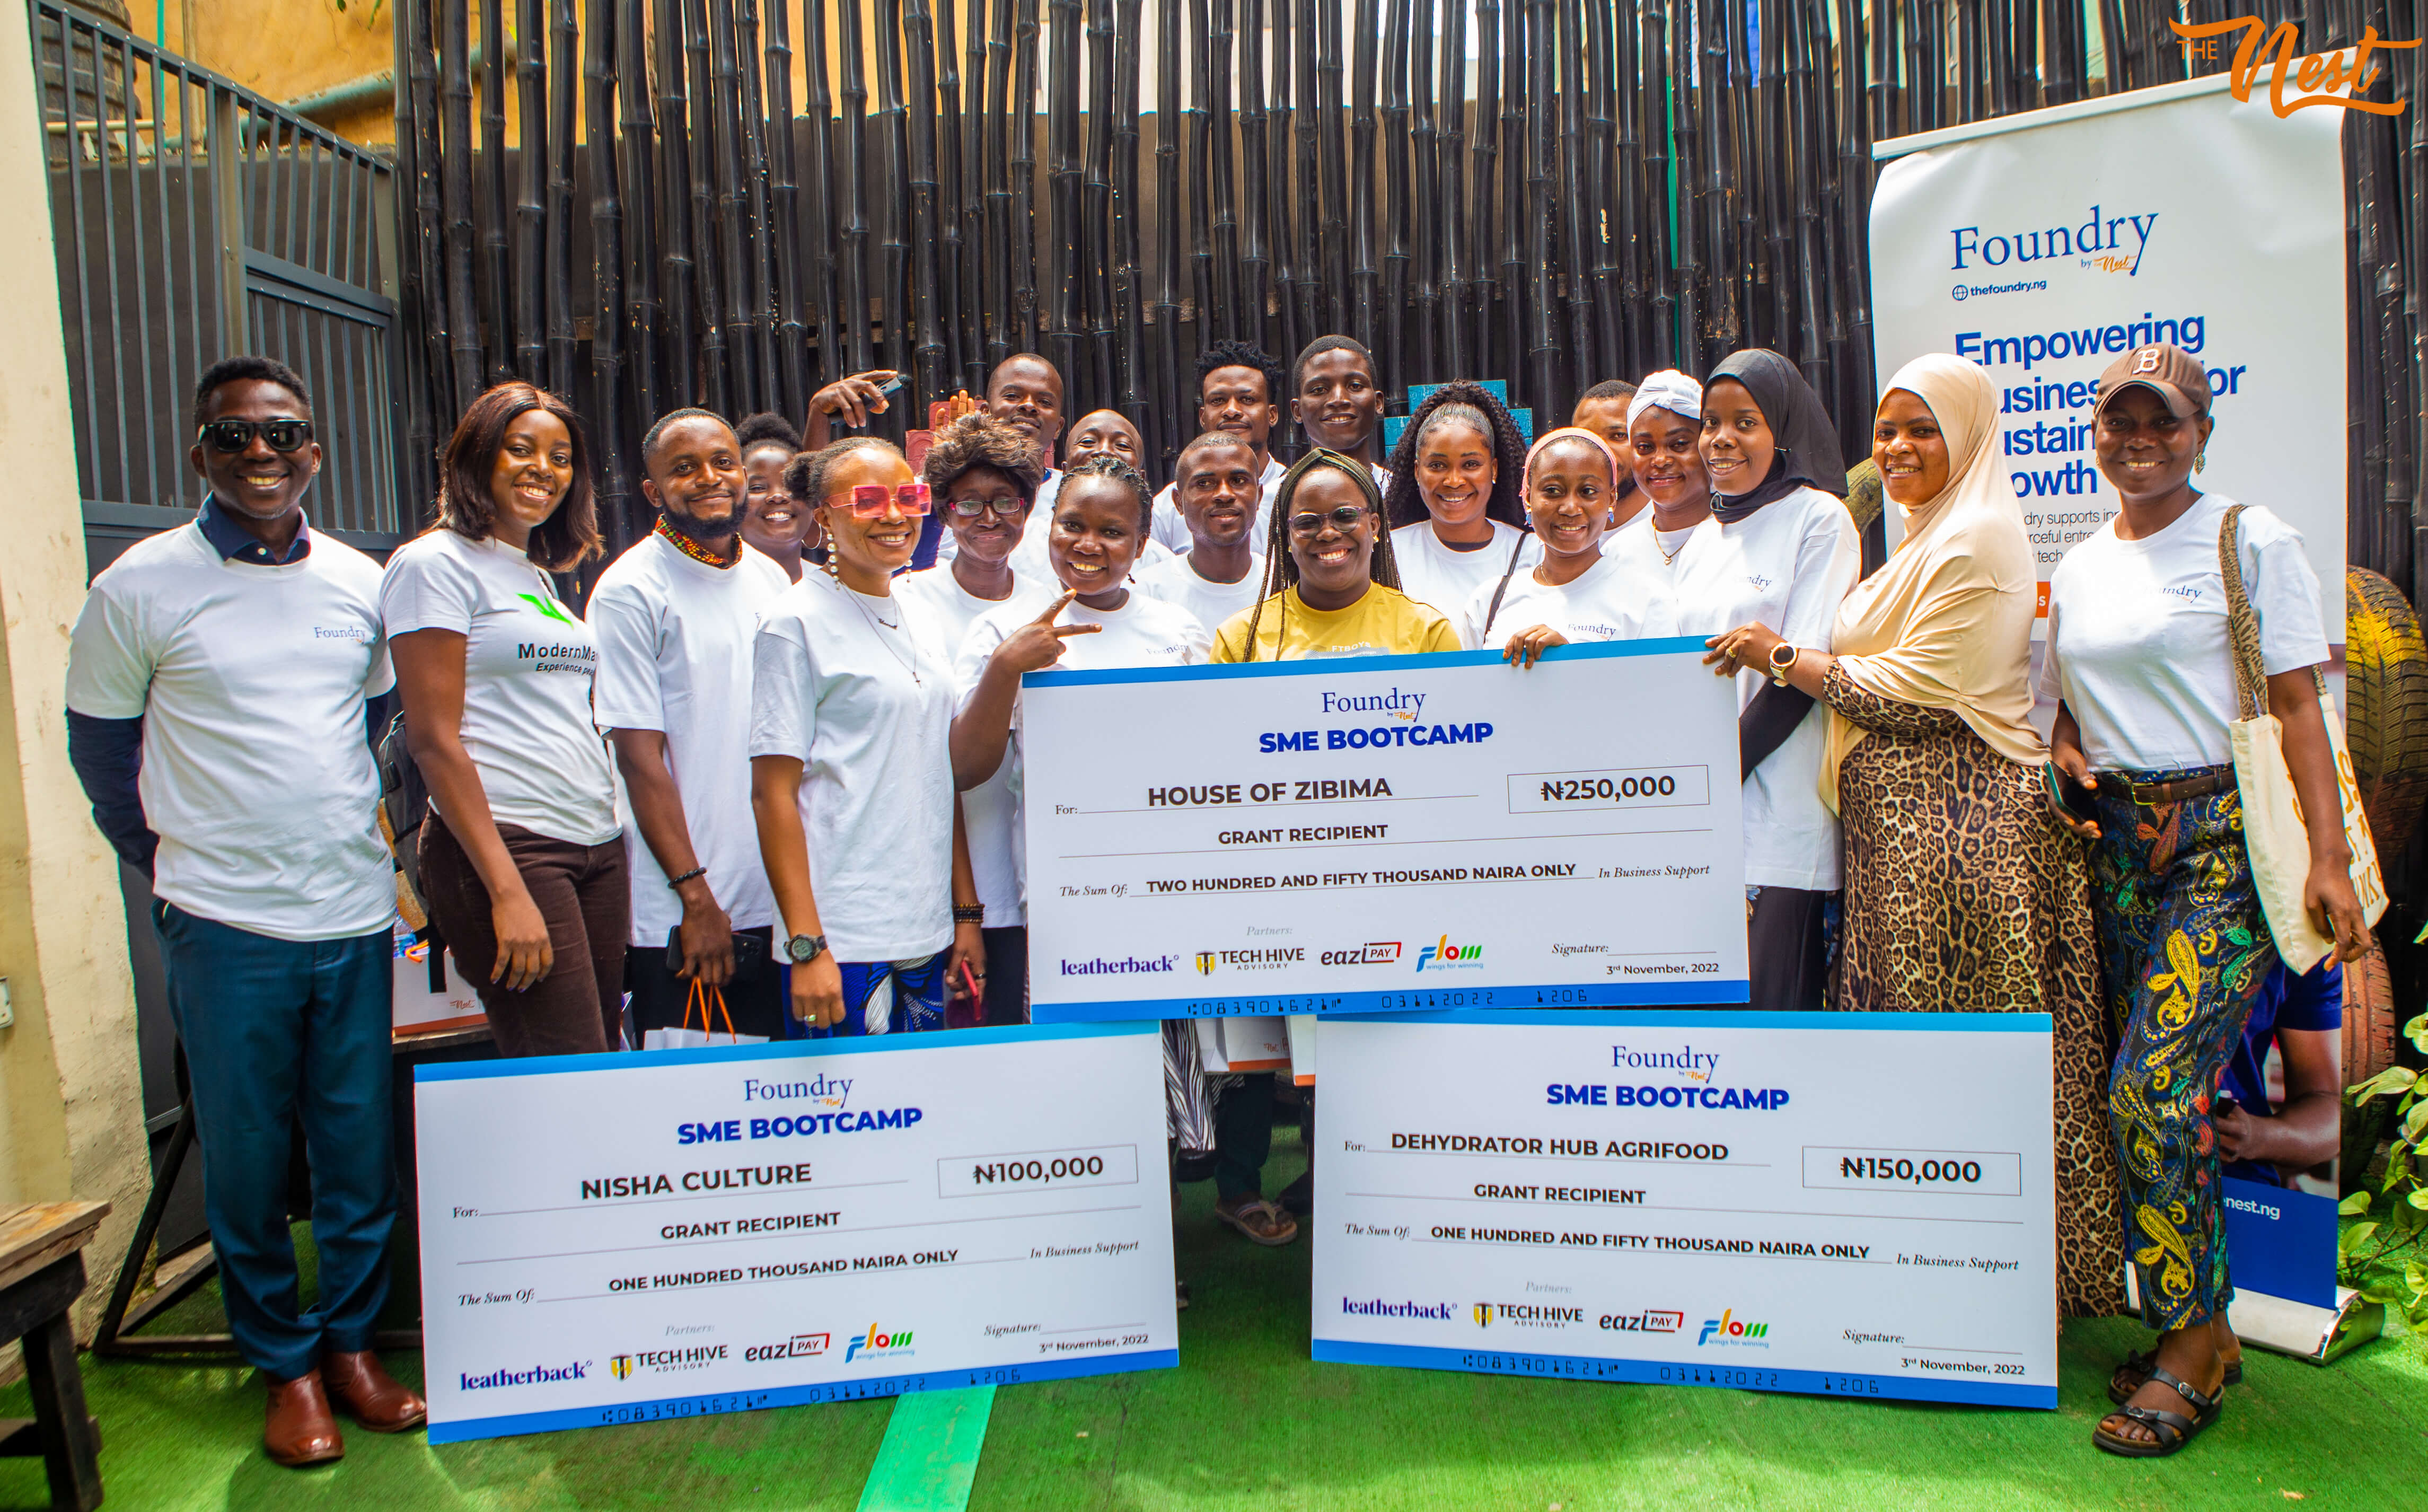 Foundry empowers over 500 SMEs, startups in Nigeria